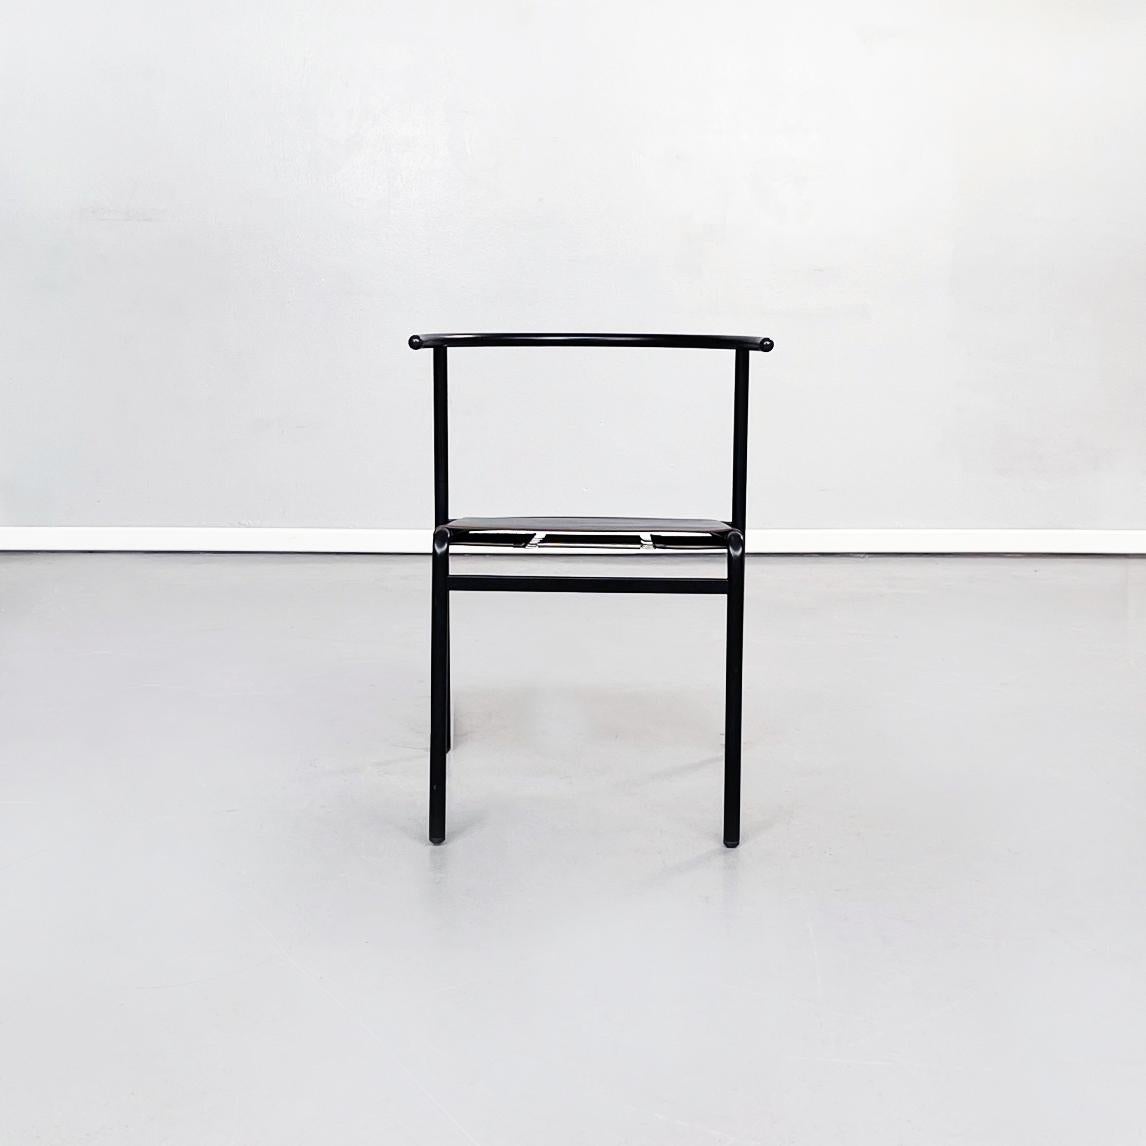 Italian mid-century black steel and leather Cafè Chairs by Starck for Baleri, 1980s
Pair of chairs mod. Cafè Chair with squared seat in black leather. The seat is made up of a leather strip with 6 horizontal cuts, supported by latex rubber and